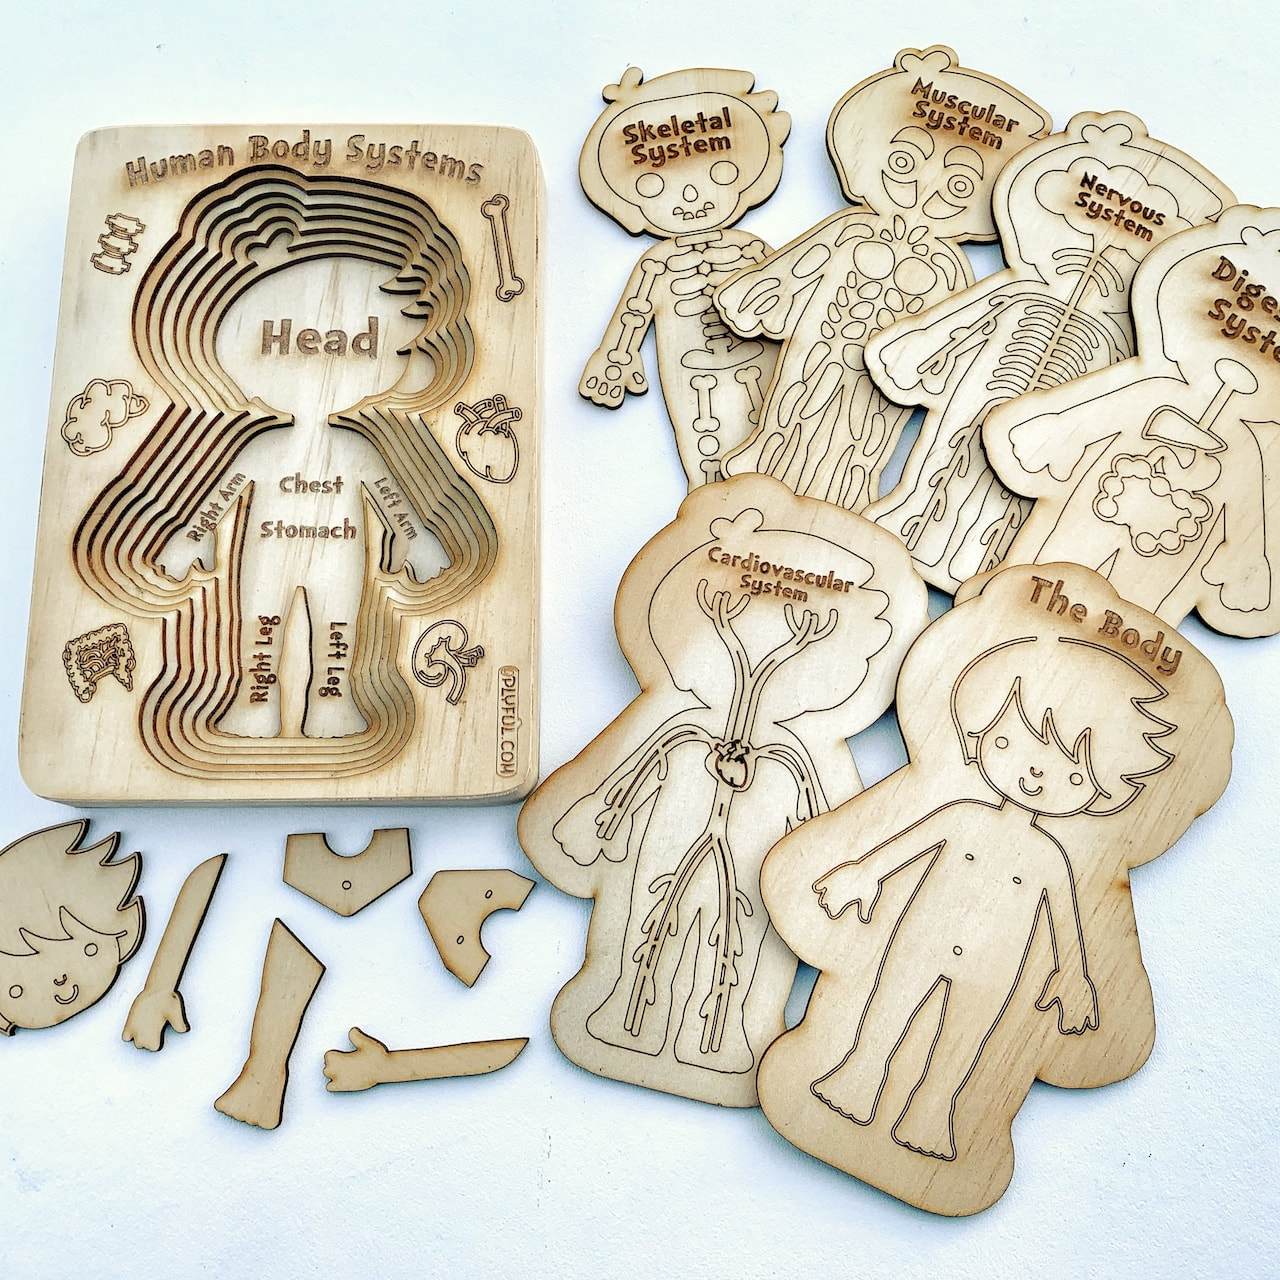 Human Body Systems - A 'sliced' Wooden Human Layered Puzzle Plyful 